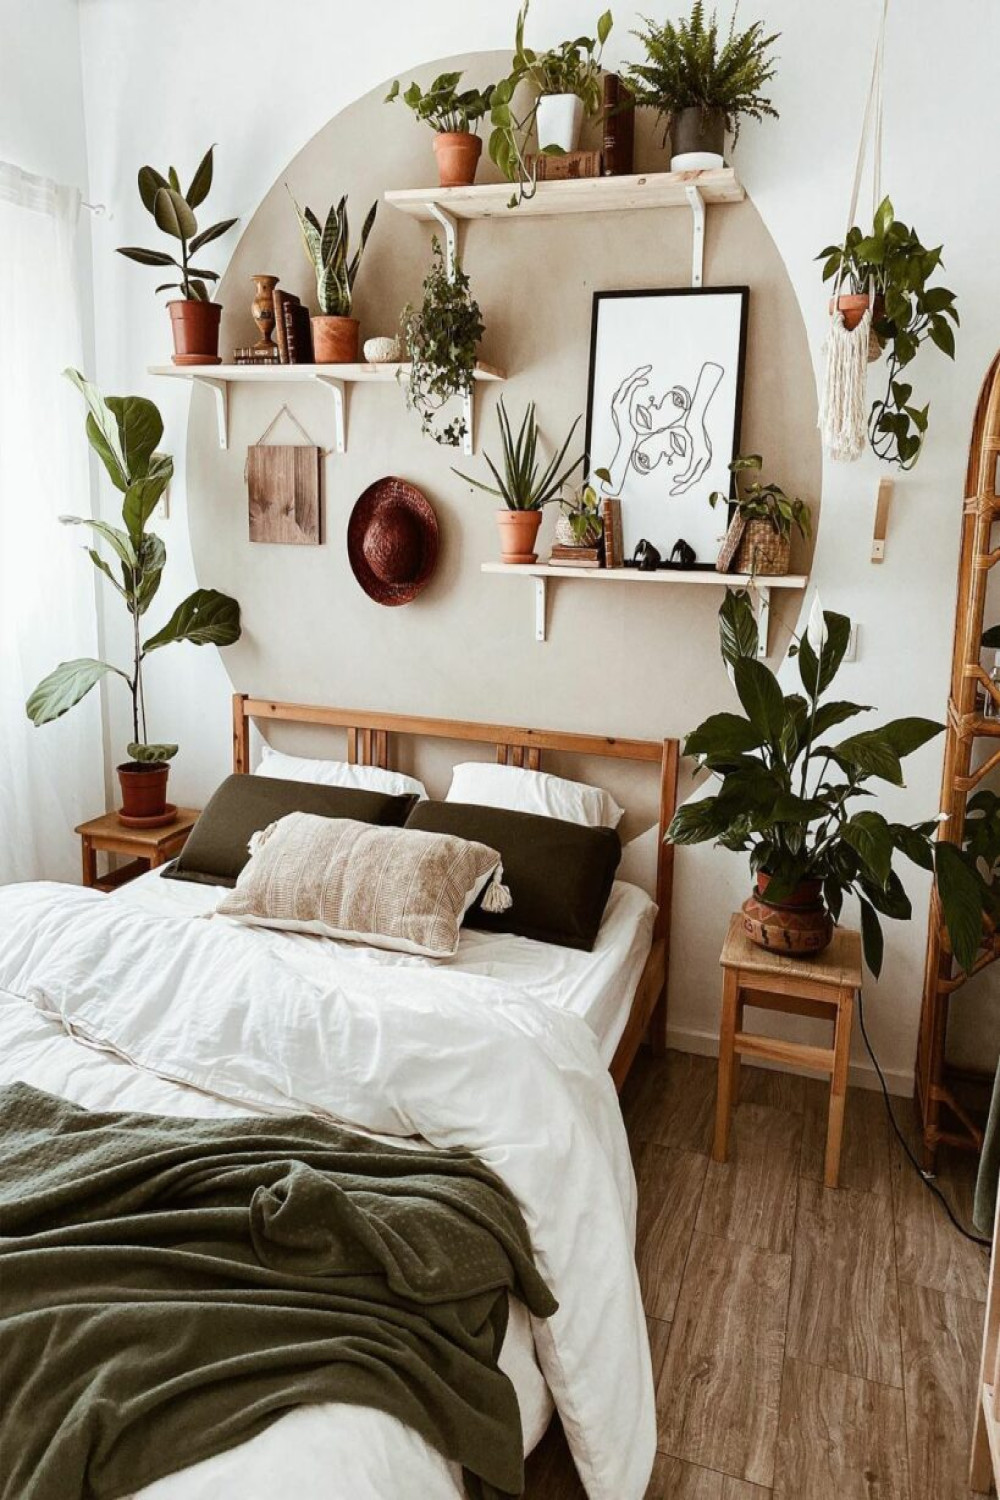 Plant Room Ideas: How To Turn Your Home Into a Leafy Paradise